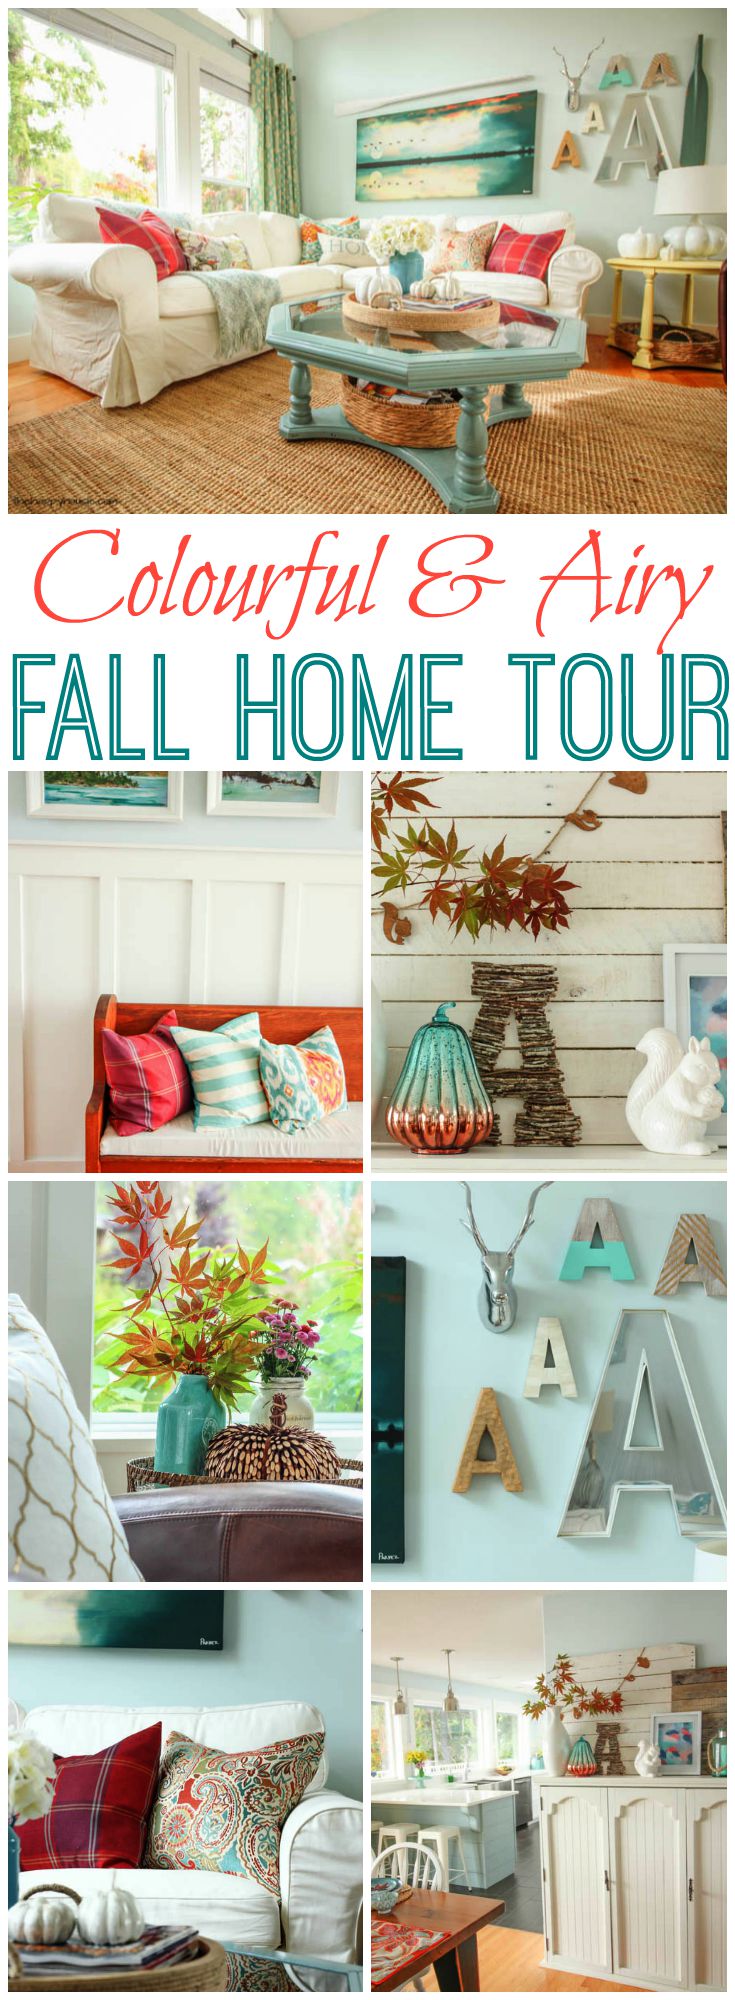 I love this fresh and colourful fall home tour at thehappyhousie.com